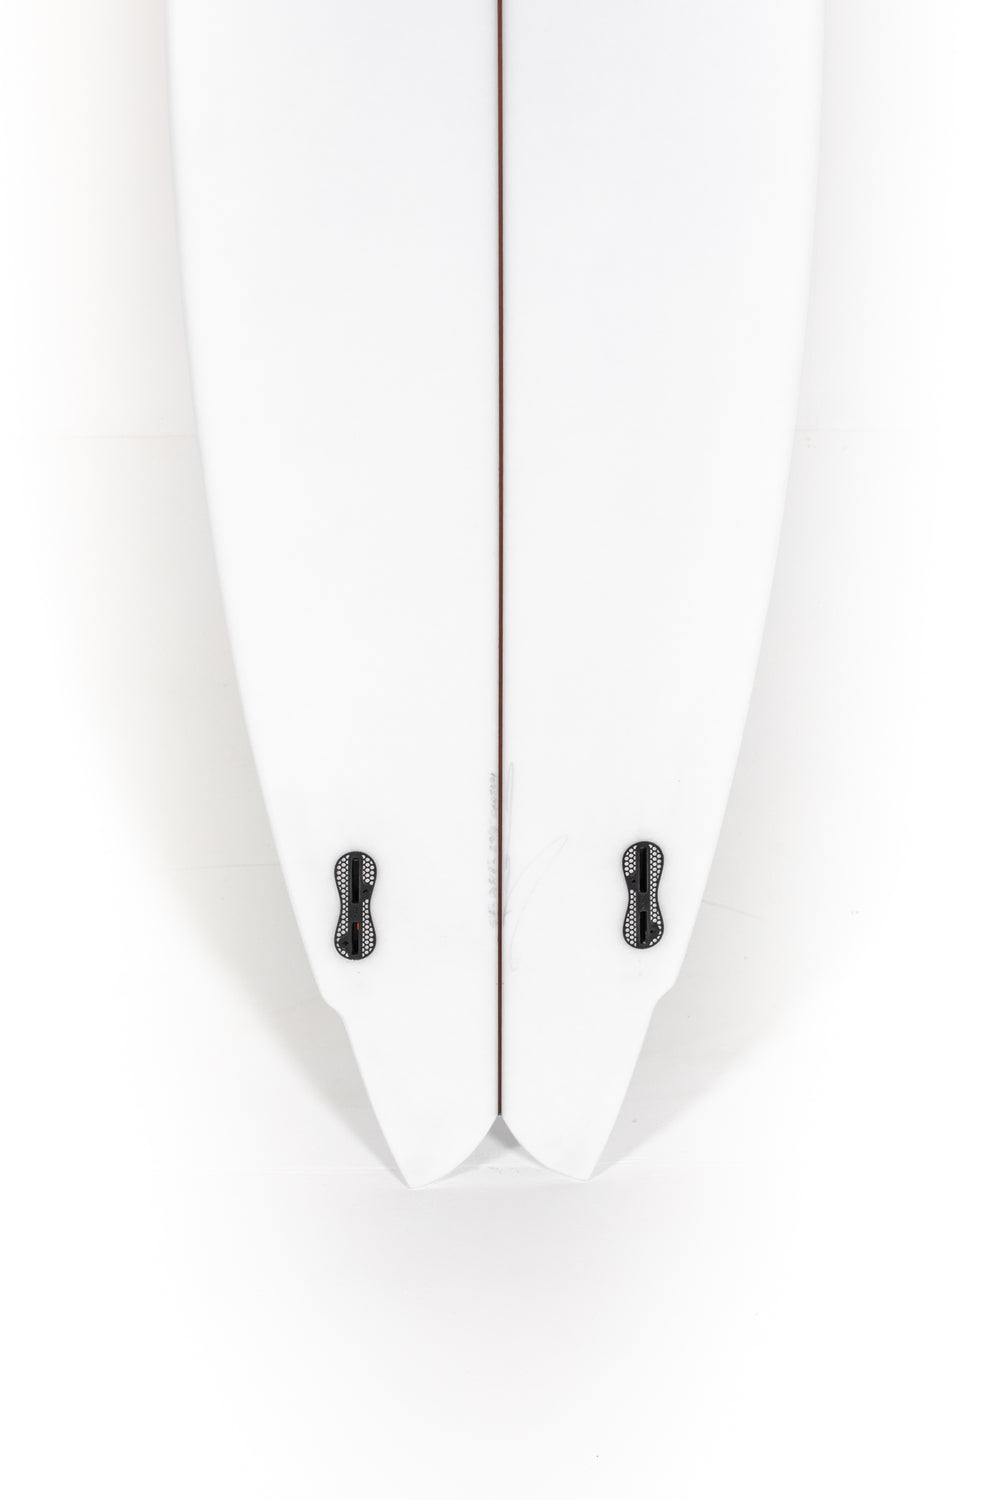 WOLVERINE by Chris Christenson - 6'6 at PUKAS SURF SHOP